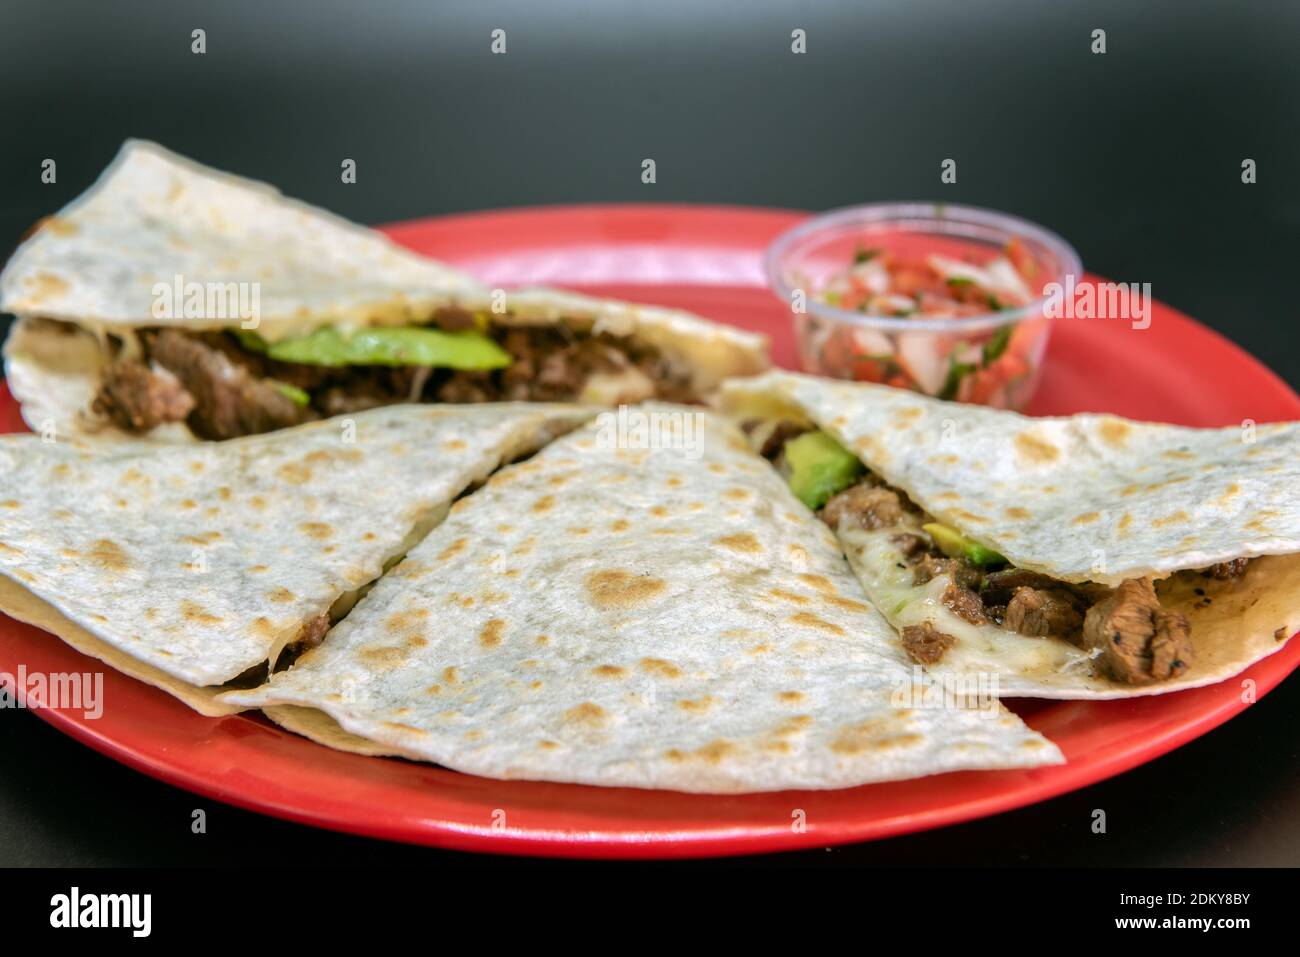 Steak Asada quesadilla loaded with fresh meat, melted cheese and cut in wedges and presented on a red plate. Stock Photo